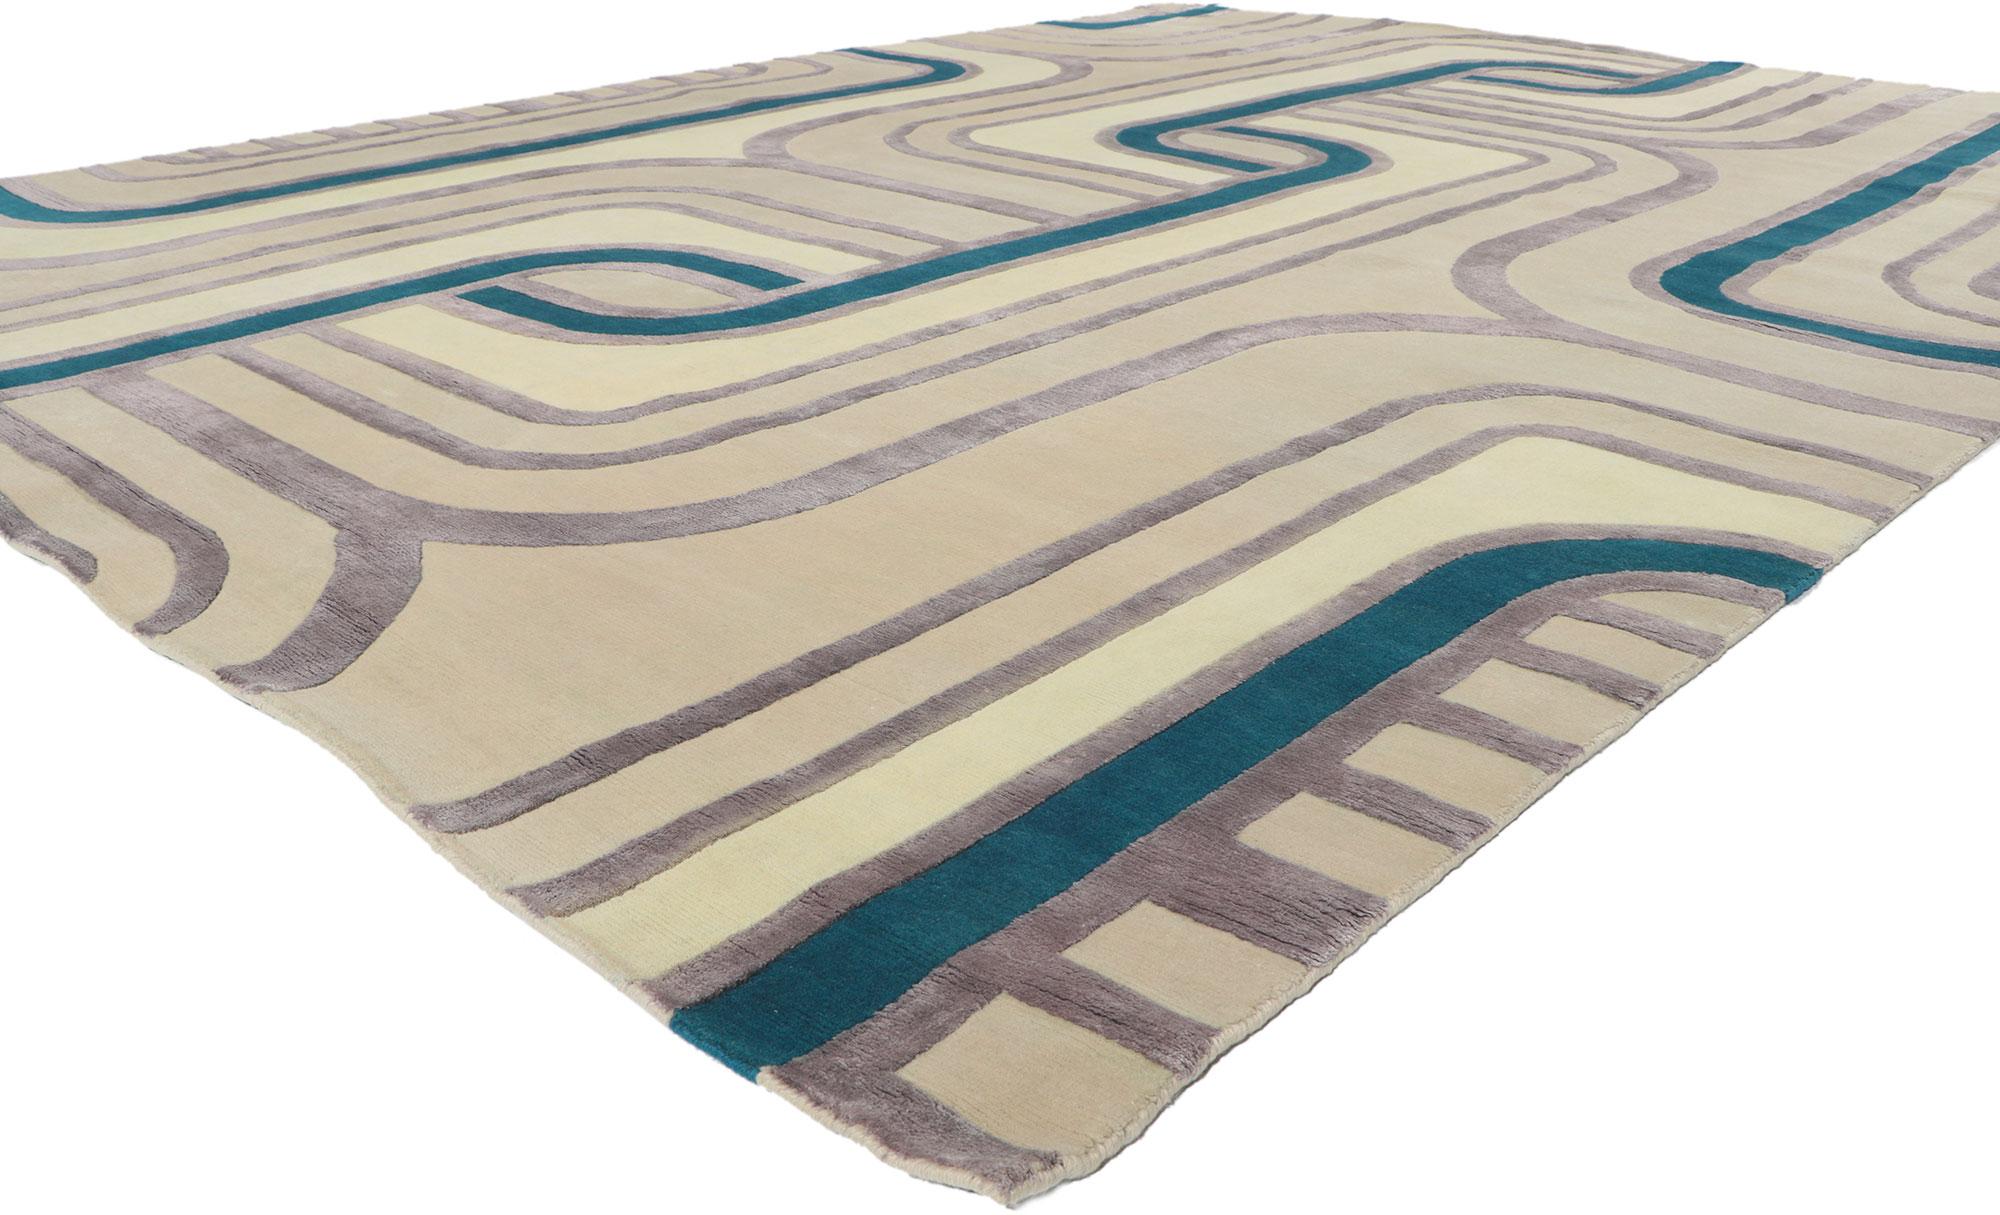 30876 New Retro Modern High-Low rug with Groovy Glamour Style, 09'02 x 12'01. Radiating elegance and vintage sophistication with incredible detail and texture, this contemporary modern rug is a captivating vision of woven beauty. The eye-catching